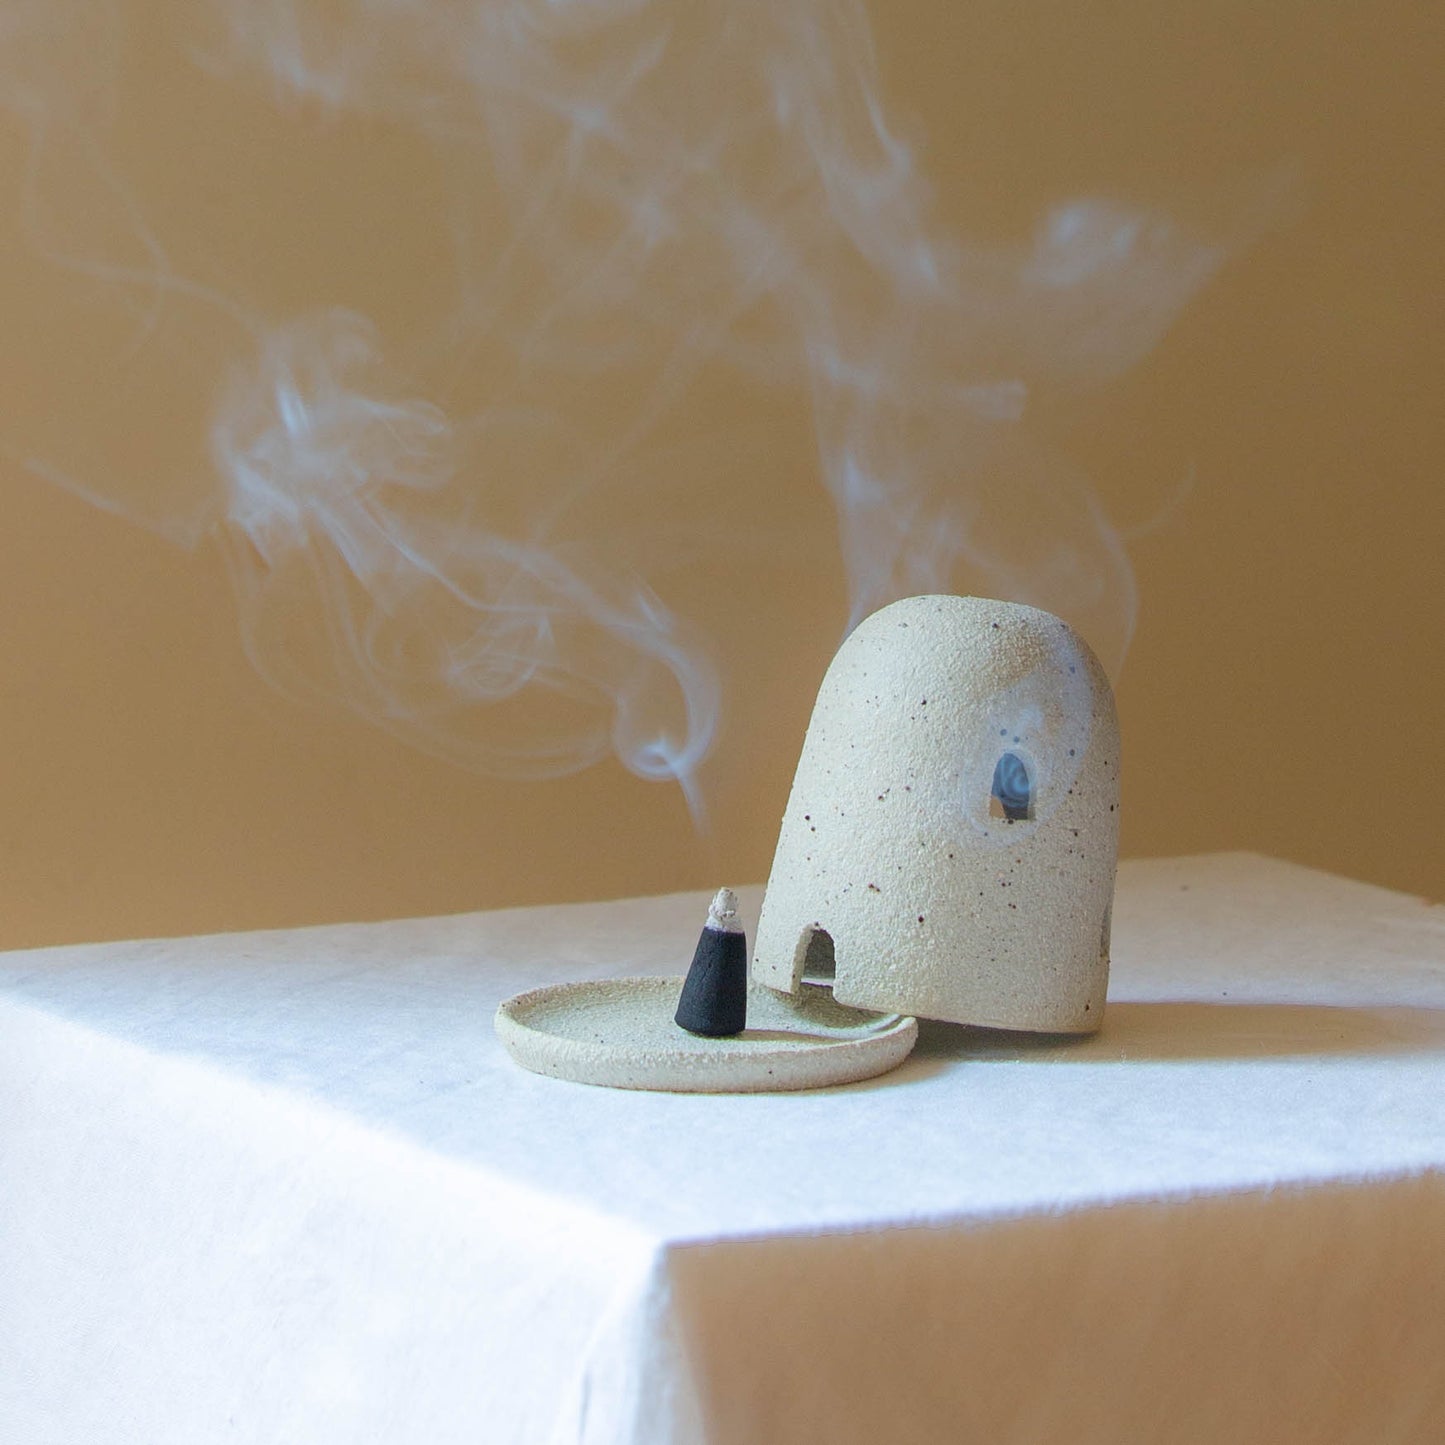 A Dome Burner in raw sand colour sitting on a white plinth with a lit incense cone which is billowing smoke. The dome burner has a smooth dome top with hand carved windows and sits on a dish.